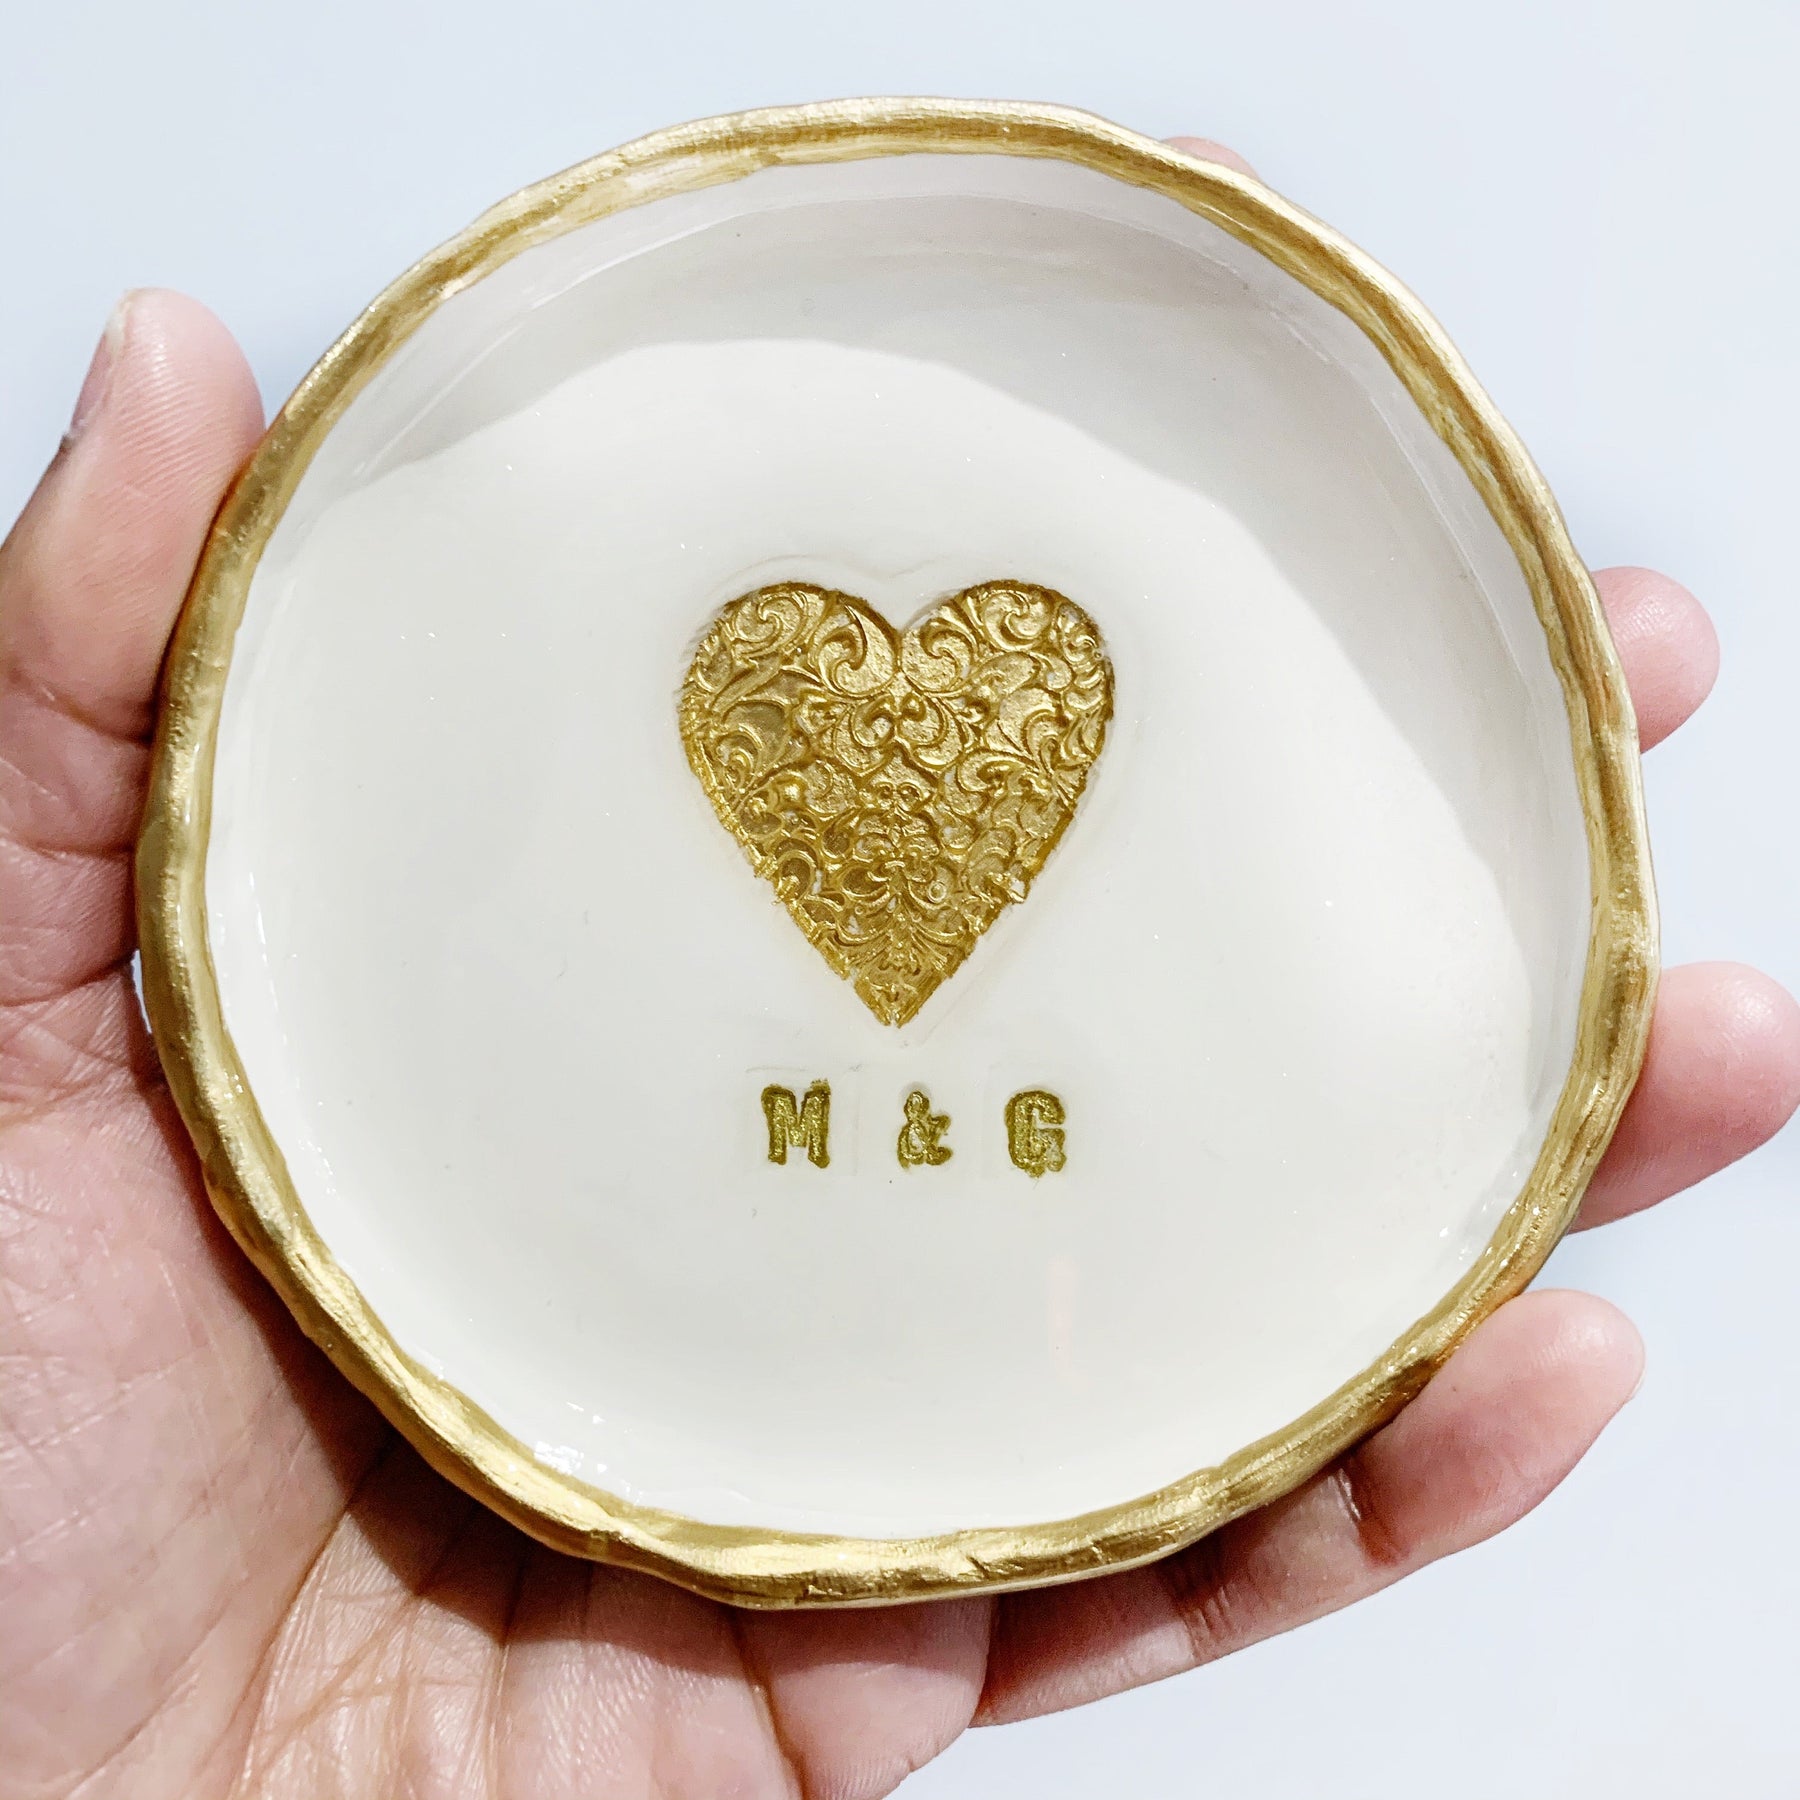 Jewelry Dish | Ring Dish | Trinket Dish| Wedding Gift | Engagement Gift | Anniversary Gift | Bridal Shower | Housewarming | Gift for Her | Mother’s Day Teachers gift | Retirement gift | coworker gift | Baptism gift | Confirmation gift 